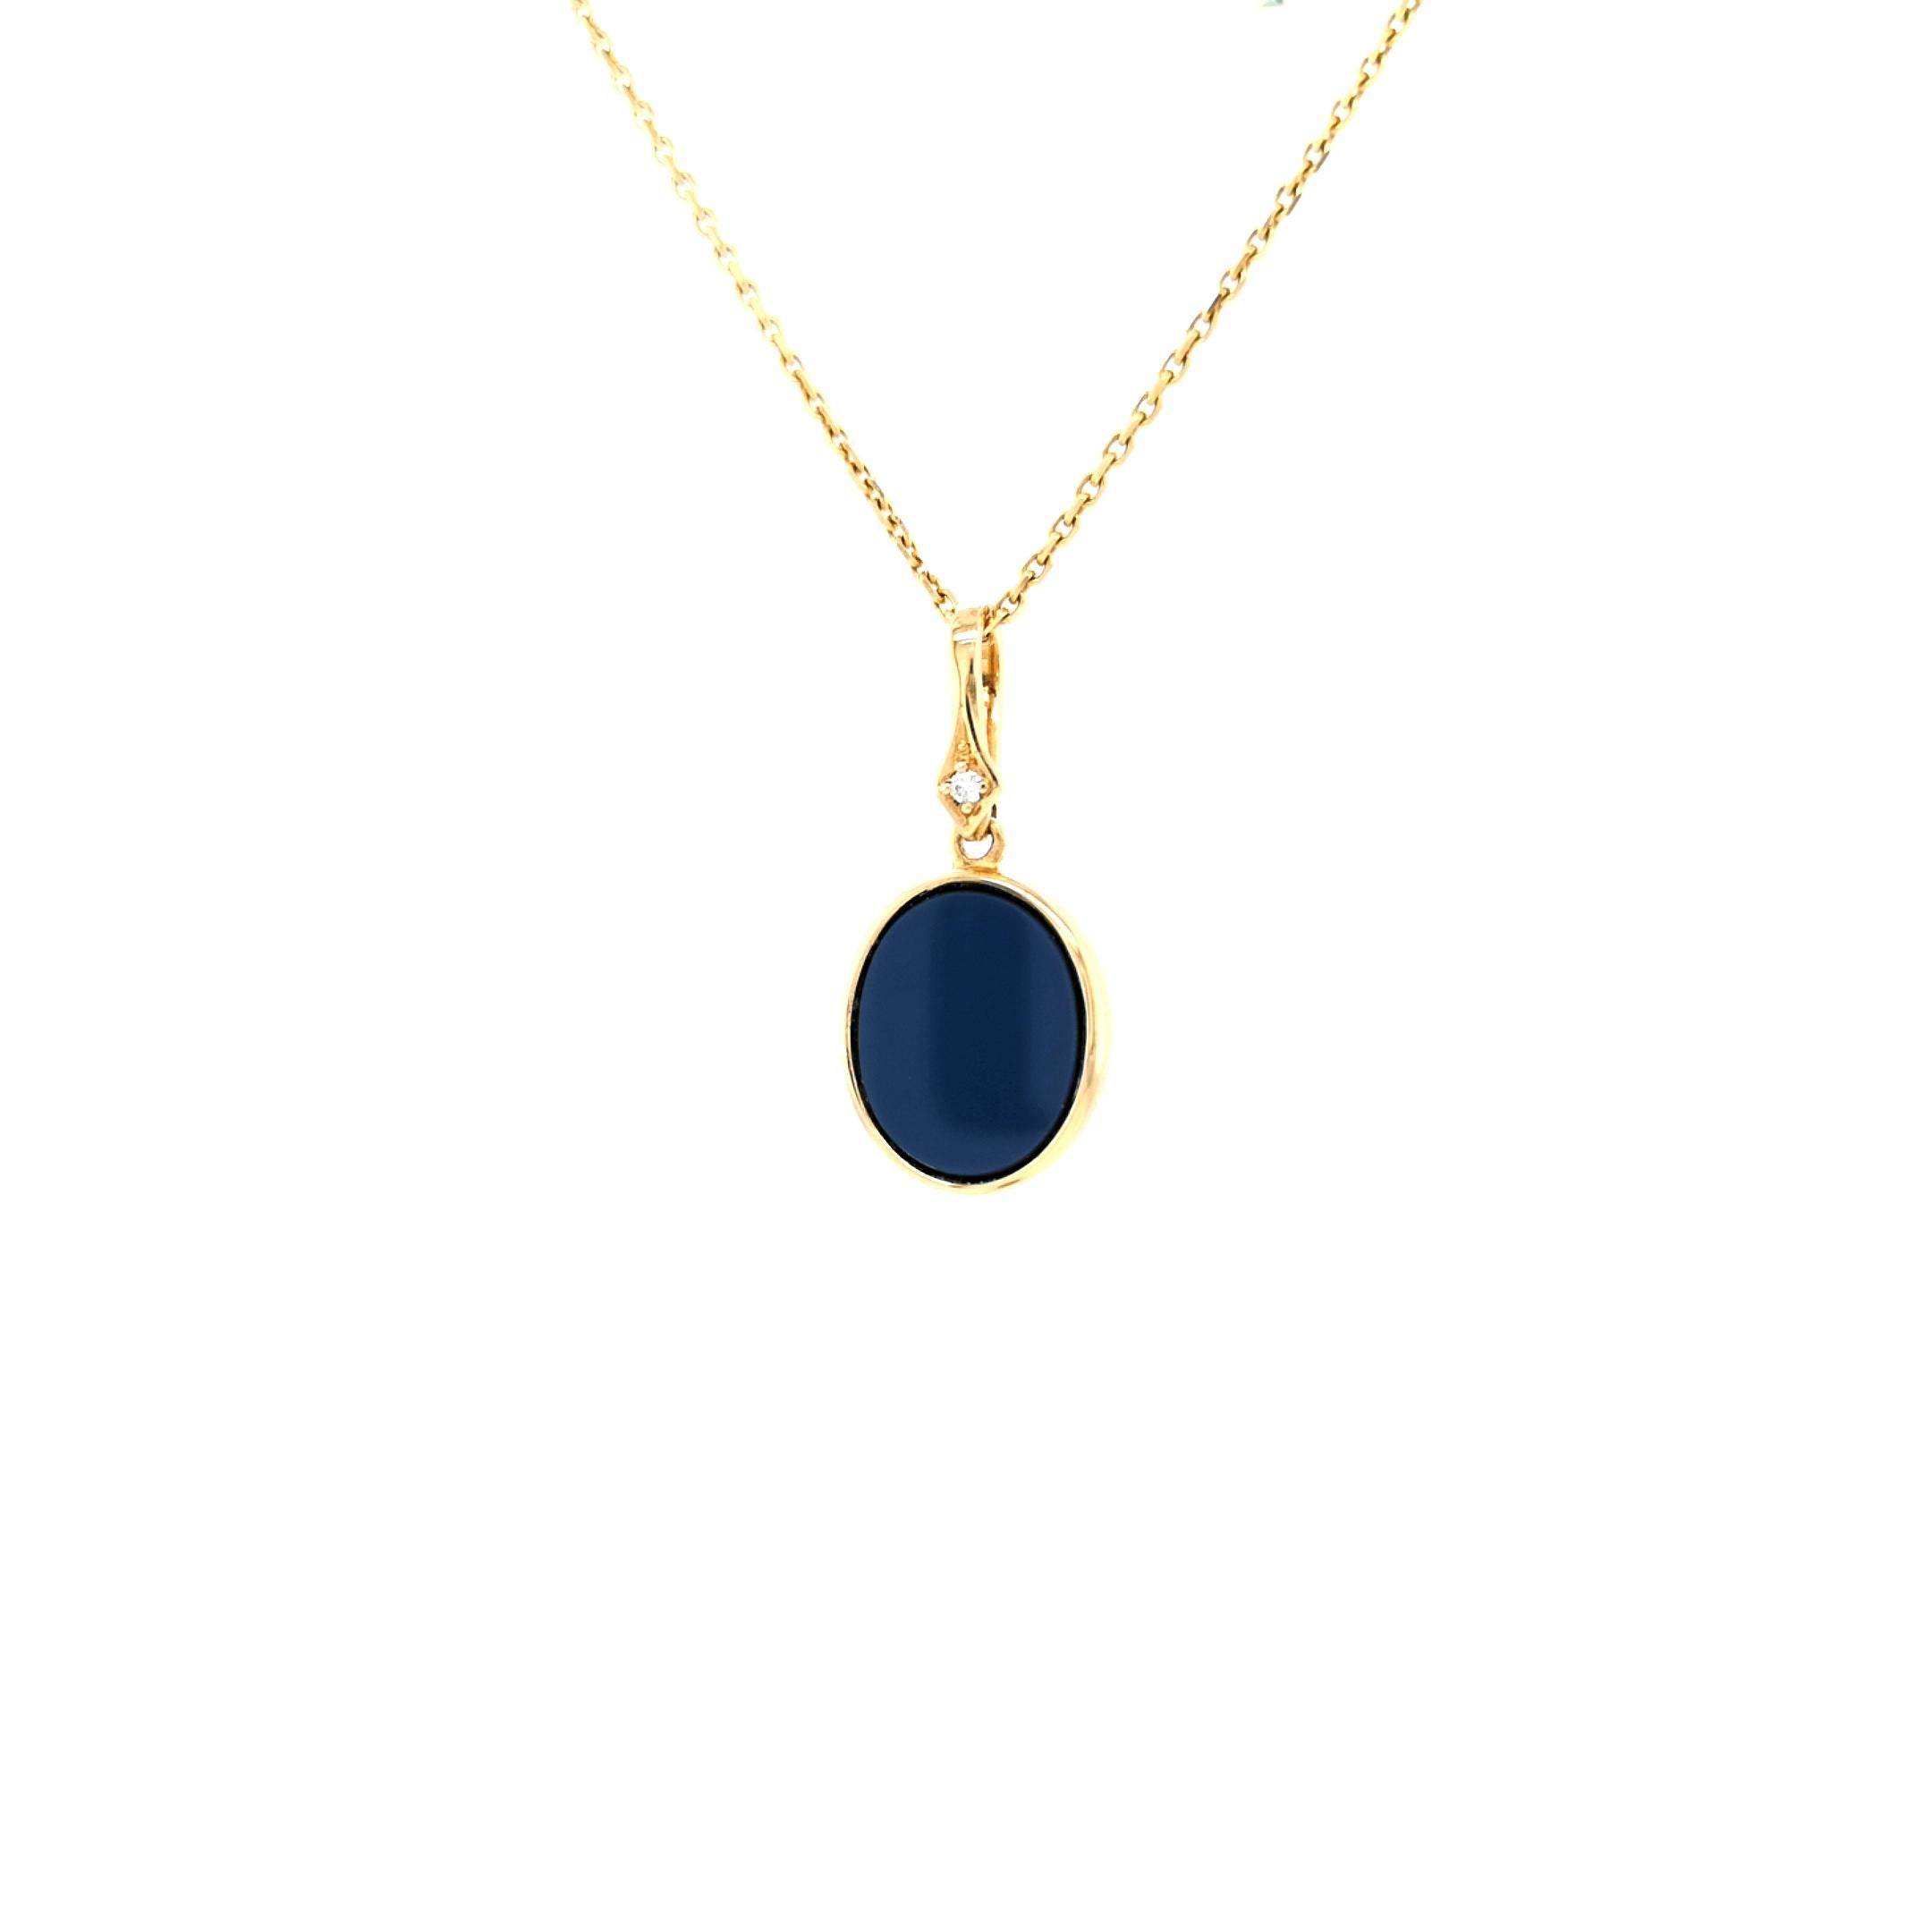 Oval Pendant - 18k Yellow Gold - 1 Diamond 0.02 ct GV S Blue Layered Onyx For Sale 3